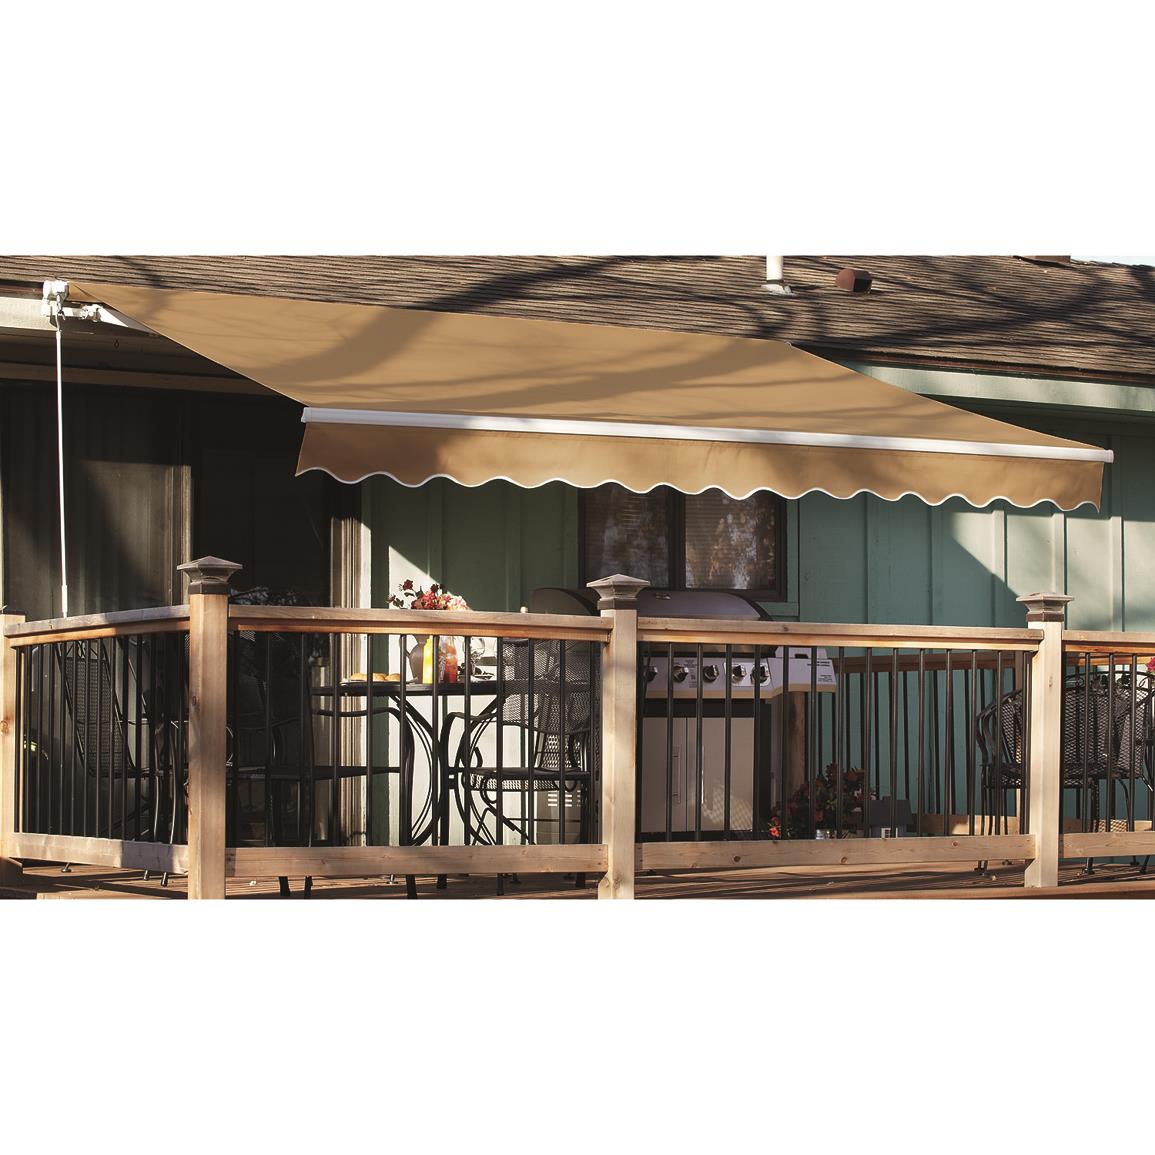 CASTLECREEK Retractable Awning  234396, Awnings \u0026 Shades at Sportsman\u002639;s Guide